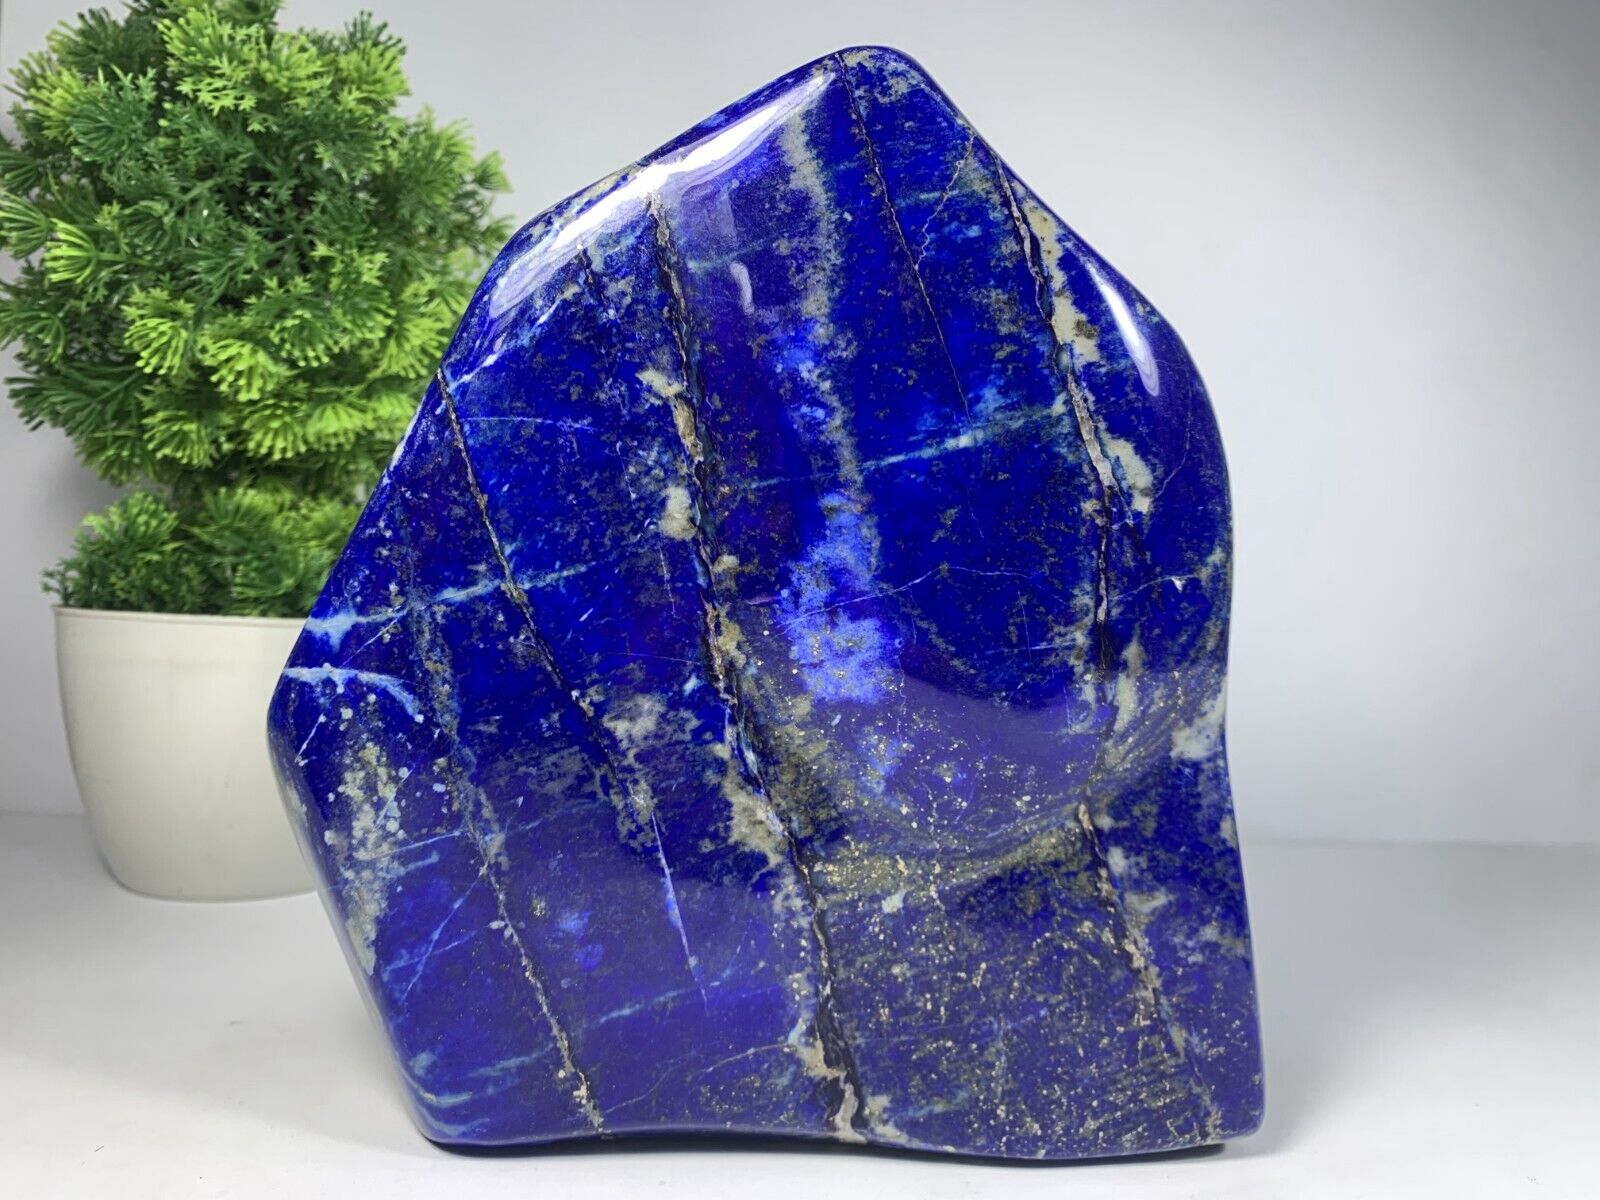 2.79 KG Lapis Lazuli Freeform Grade AAA+ Tumbled Rough Polished From Afghanistan